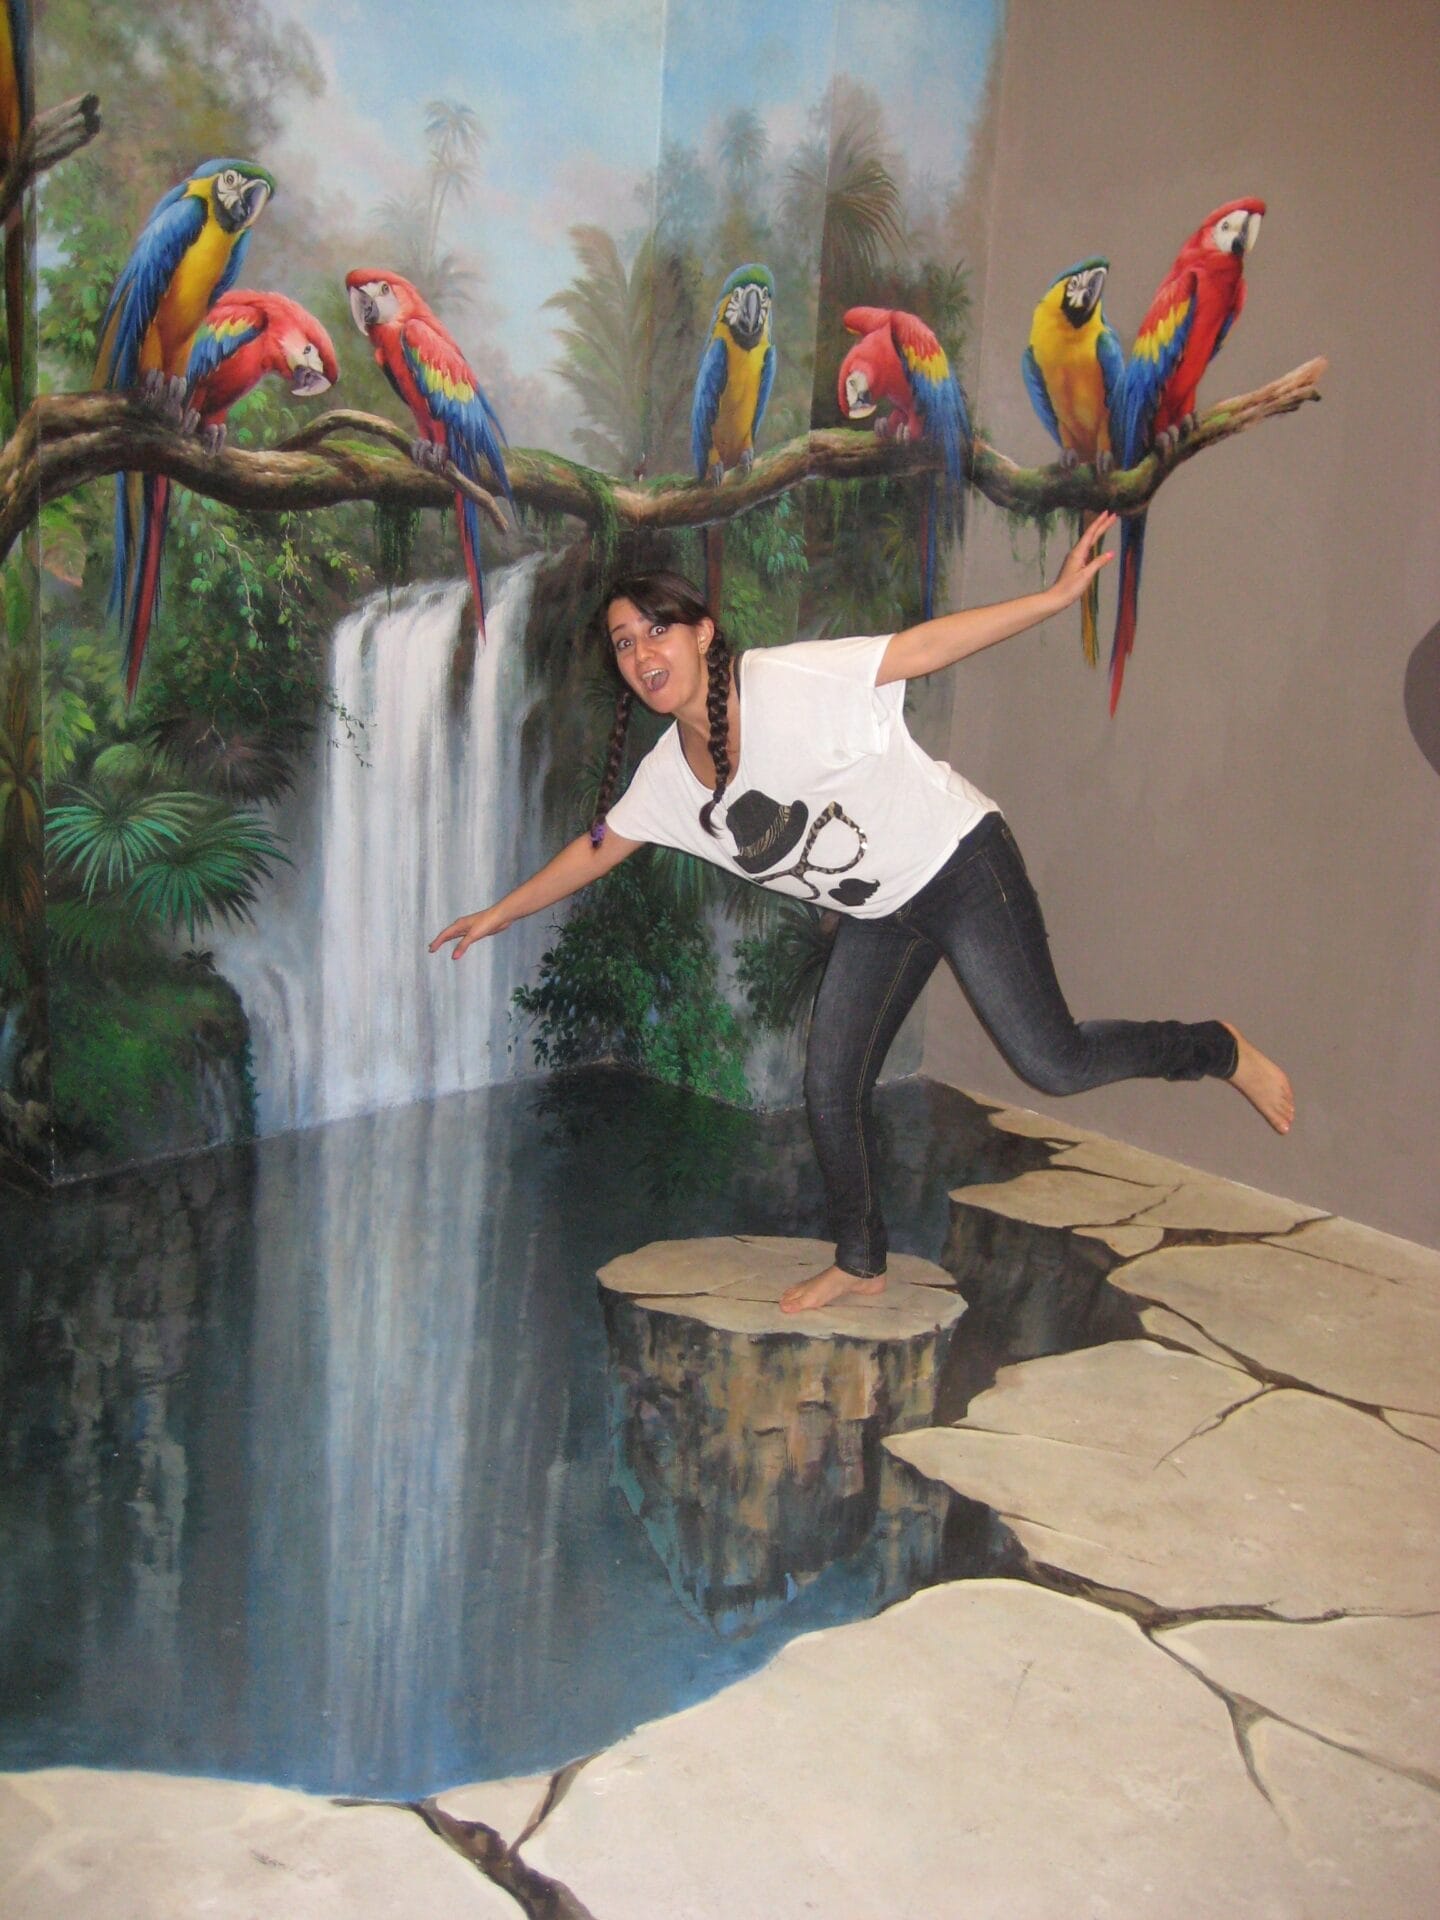 3D Art Museum - Things to do in Thailand